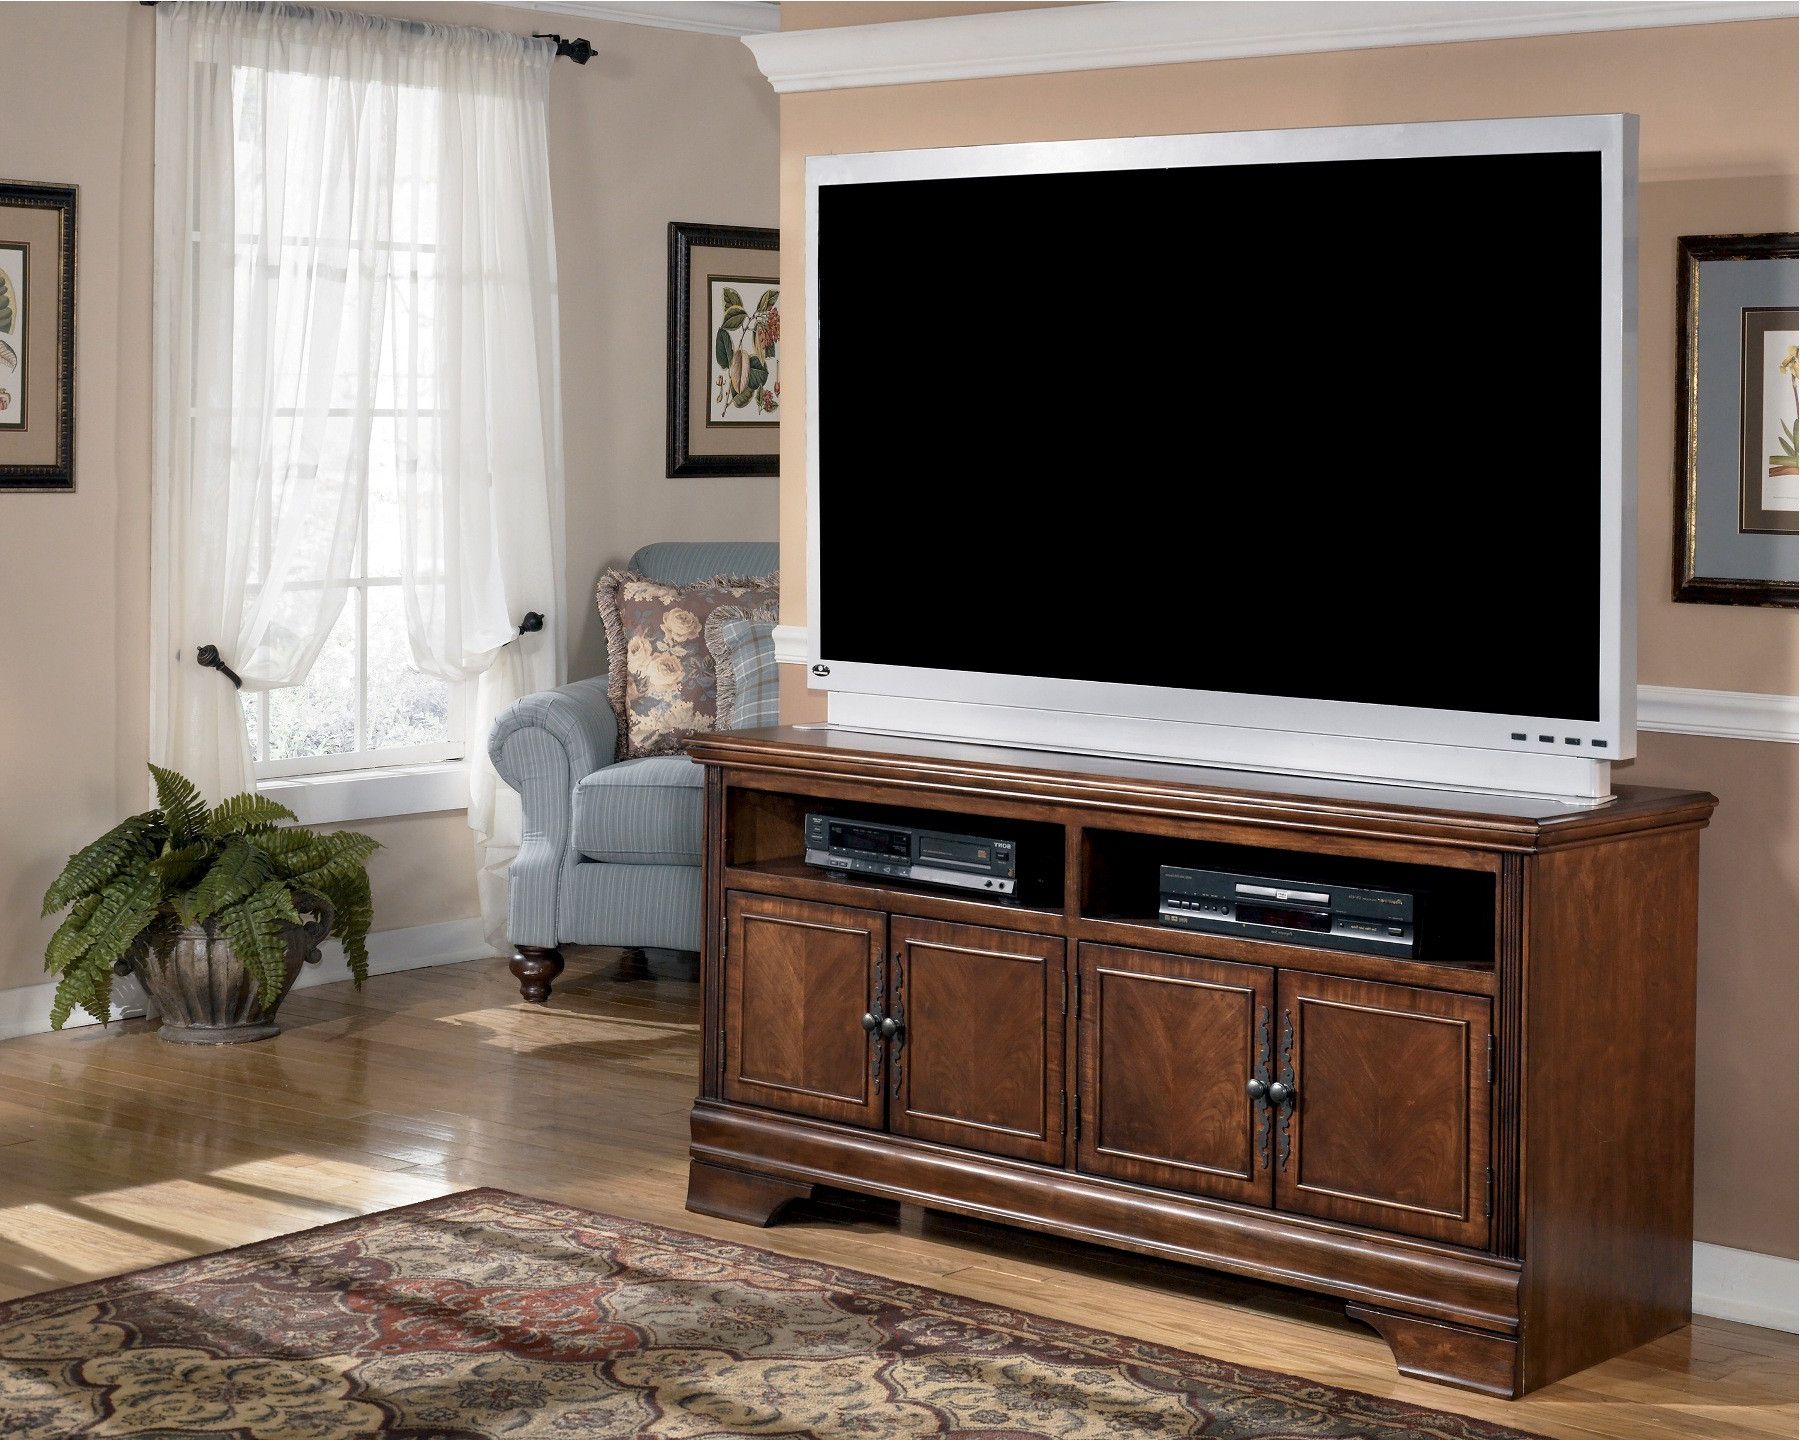 Hamlyn 60 Inch Tv Stand From Ashley (w527 38) | Coleman Intended For Evelynn Tv Stands For Tvs Up To 60" (View 12 of 20)